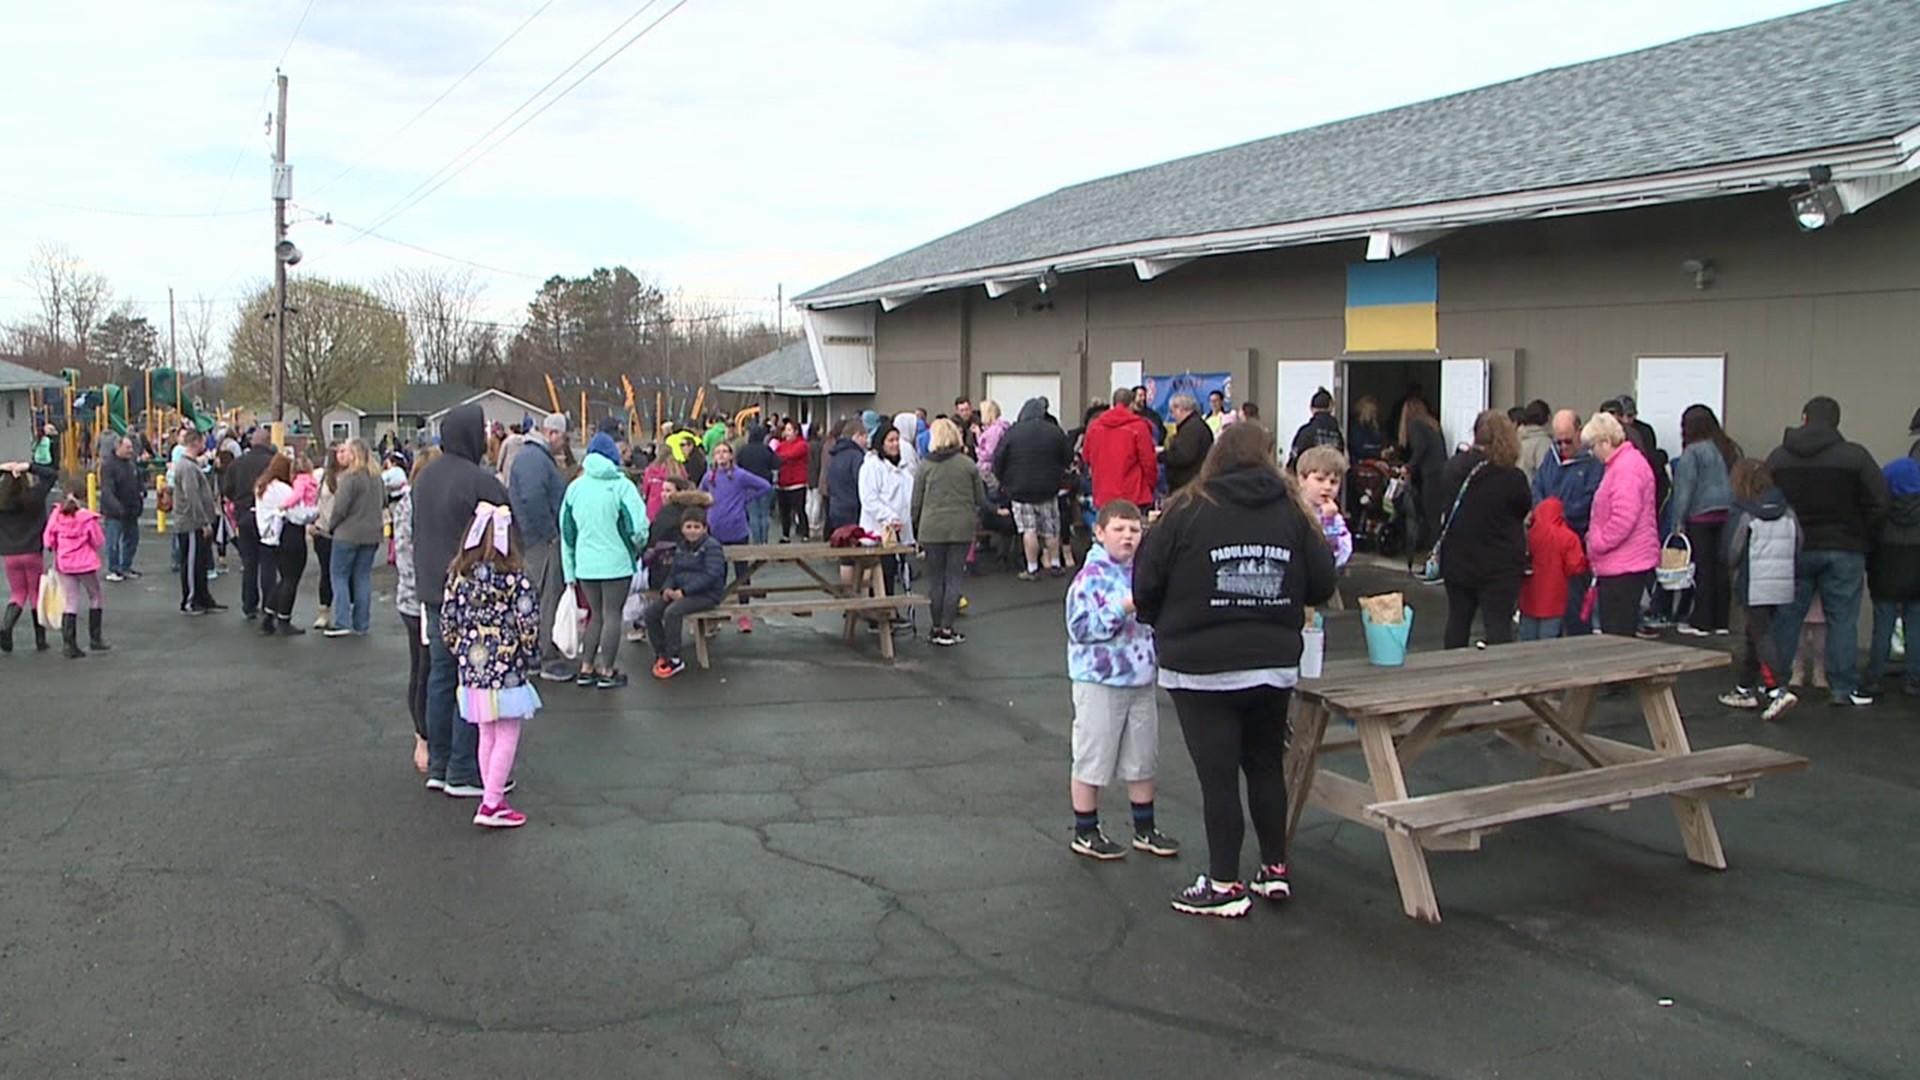 The Dunmore Rotary Club hosted an egg hunt Saturday morning at St. Anthony's Park in Dunmore.